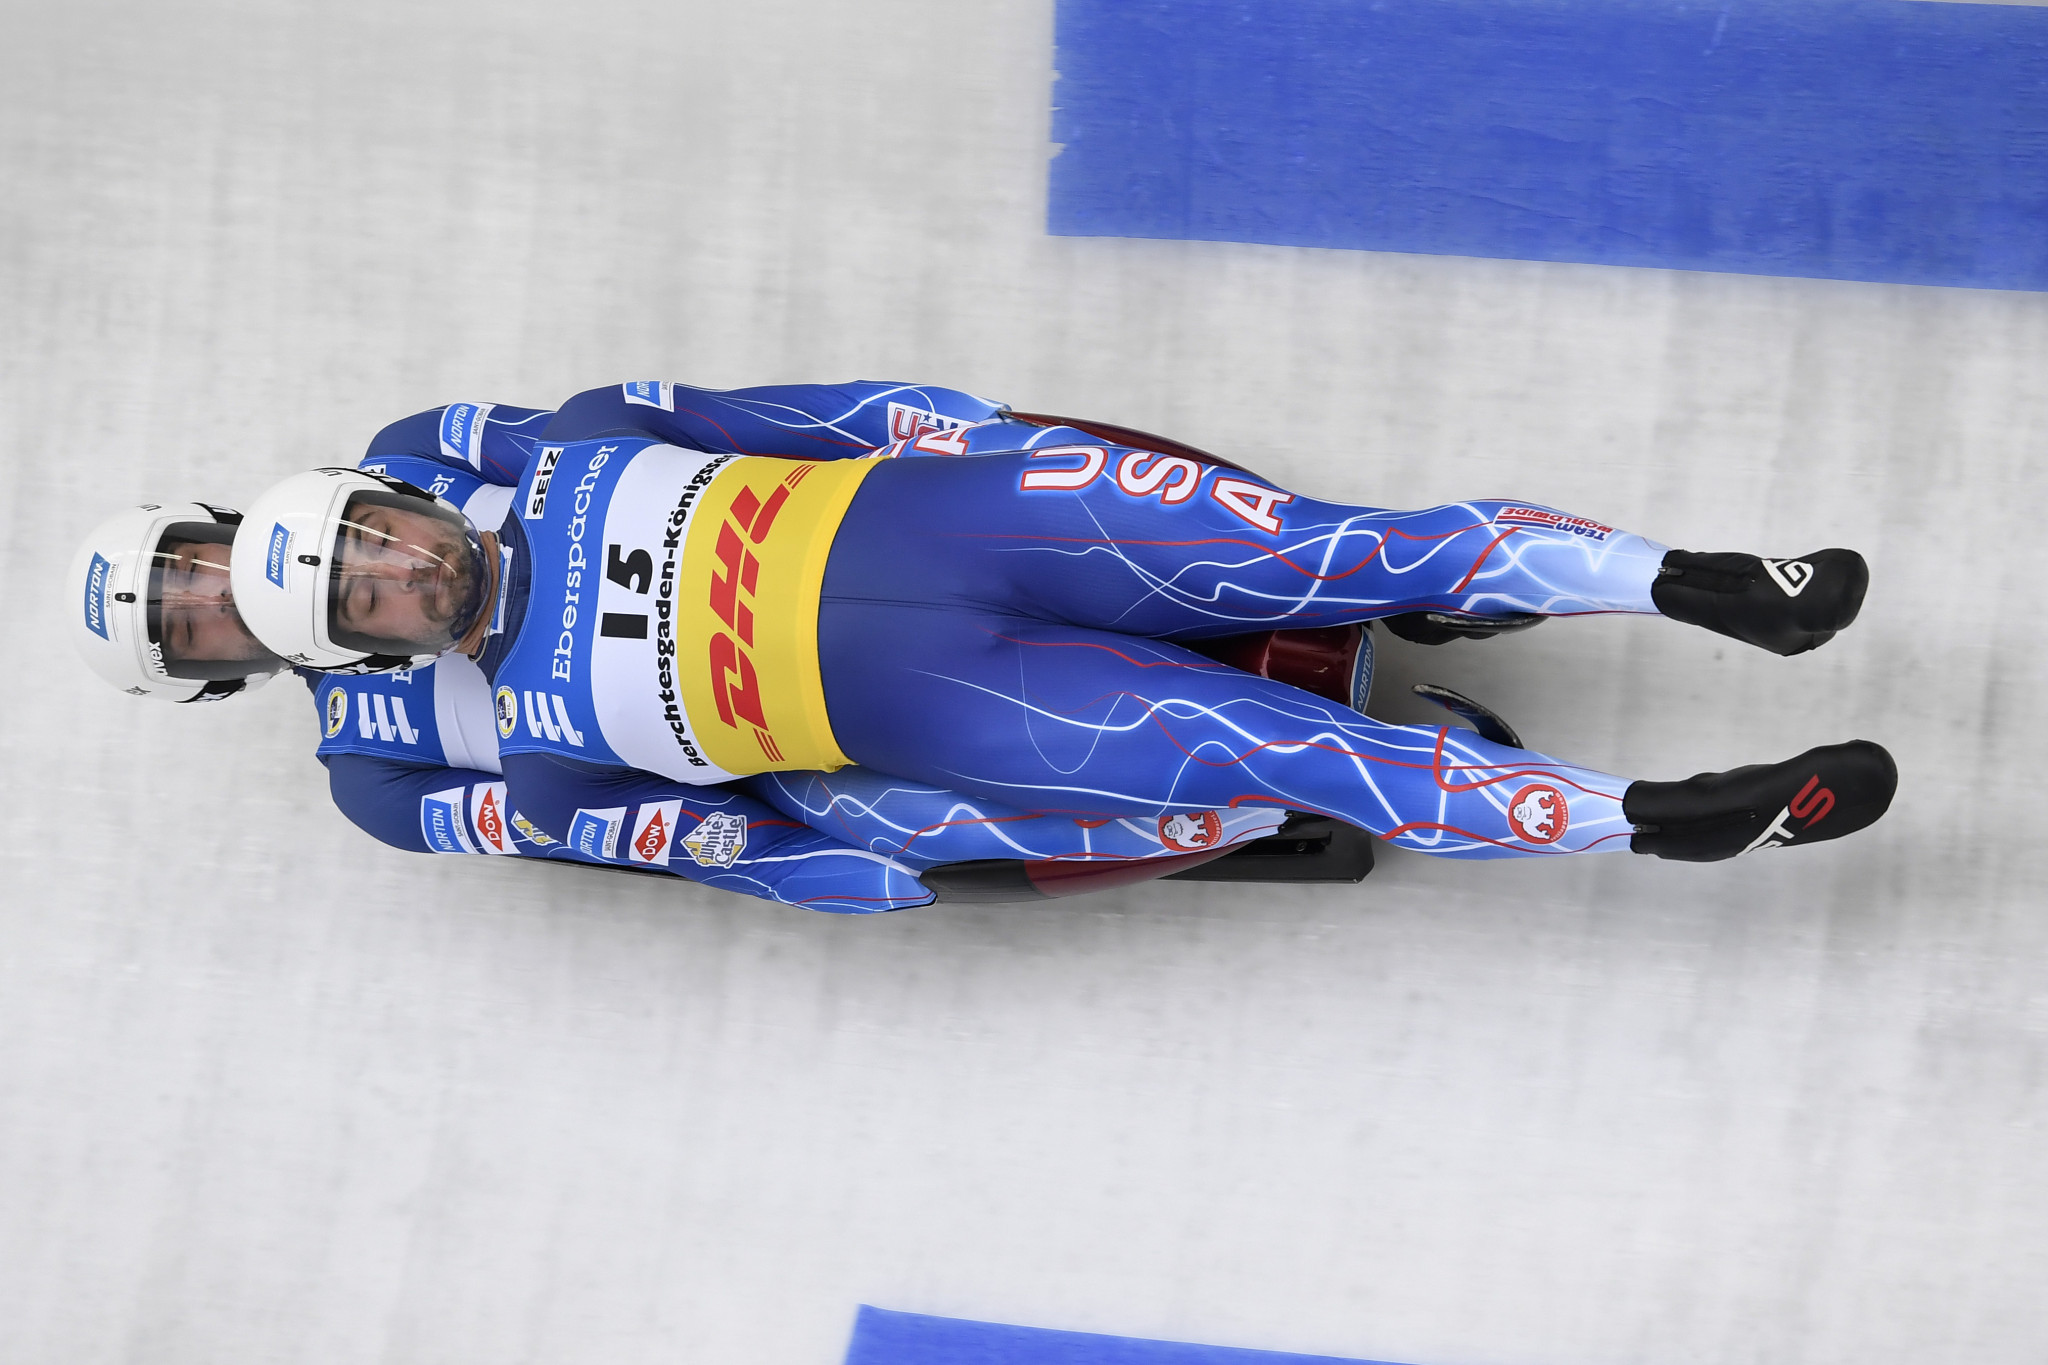 Dermatone is set to provide frostbite protection, lip balm and sunscreen products for luge athletes ©Getty Images